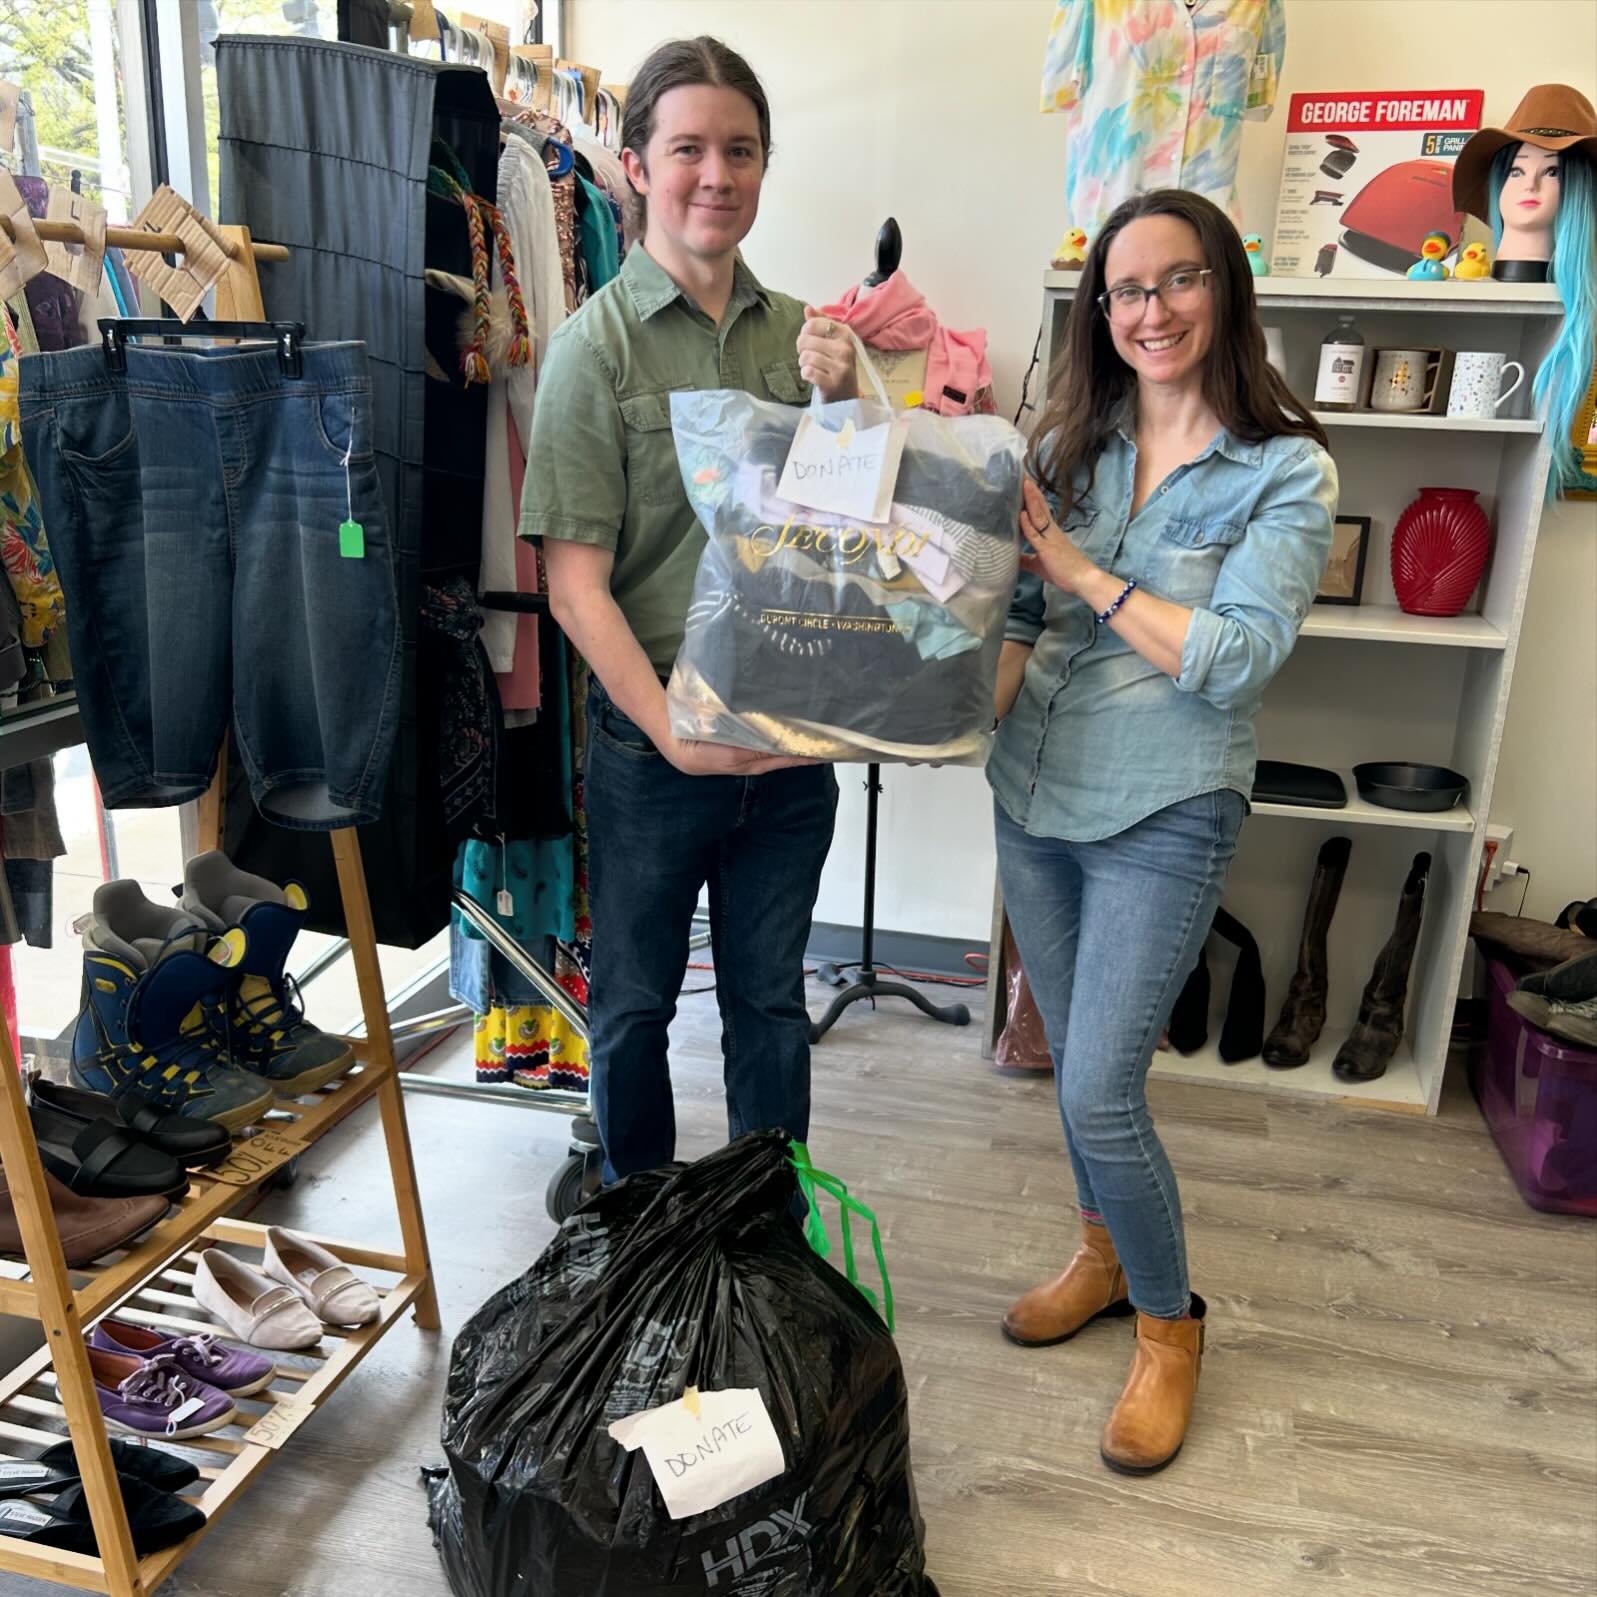 We are proud to support the @bhamdsa and local community with donations from our gender-free consignment store! ❤️ Every month at the end of the month, we go through whatever 50% off sale items didn&rsquo;t sell in order to donate them, and this is a